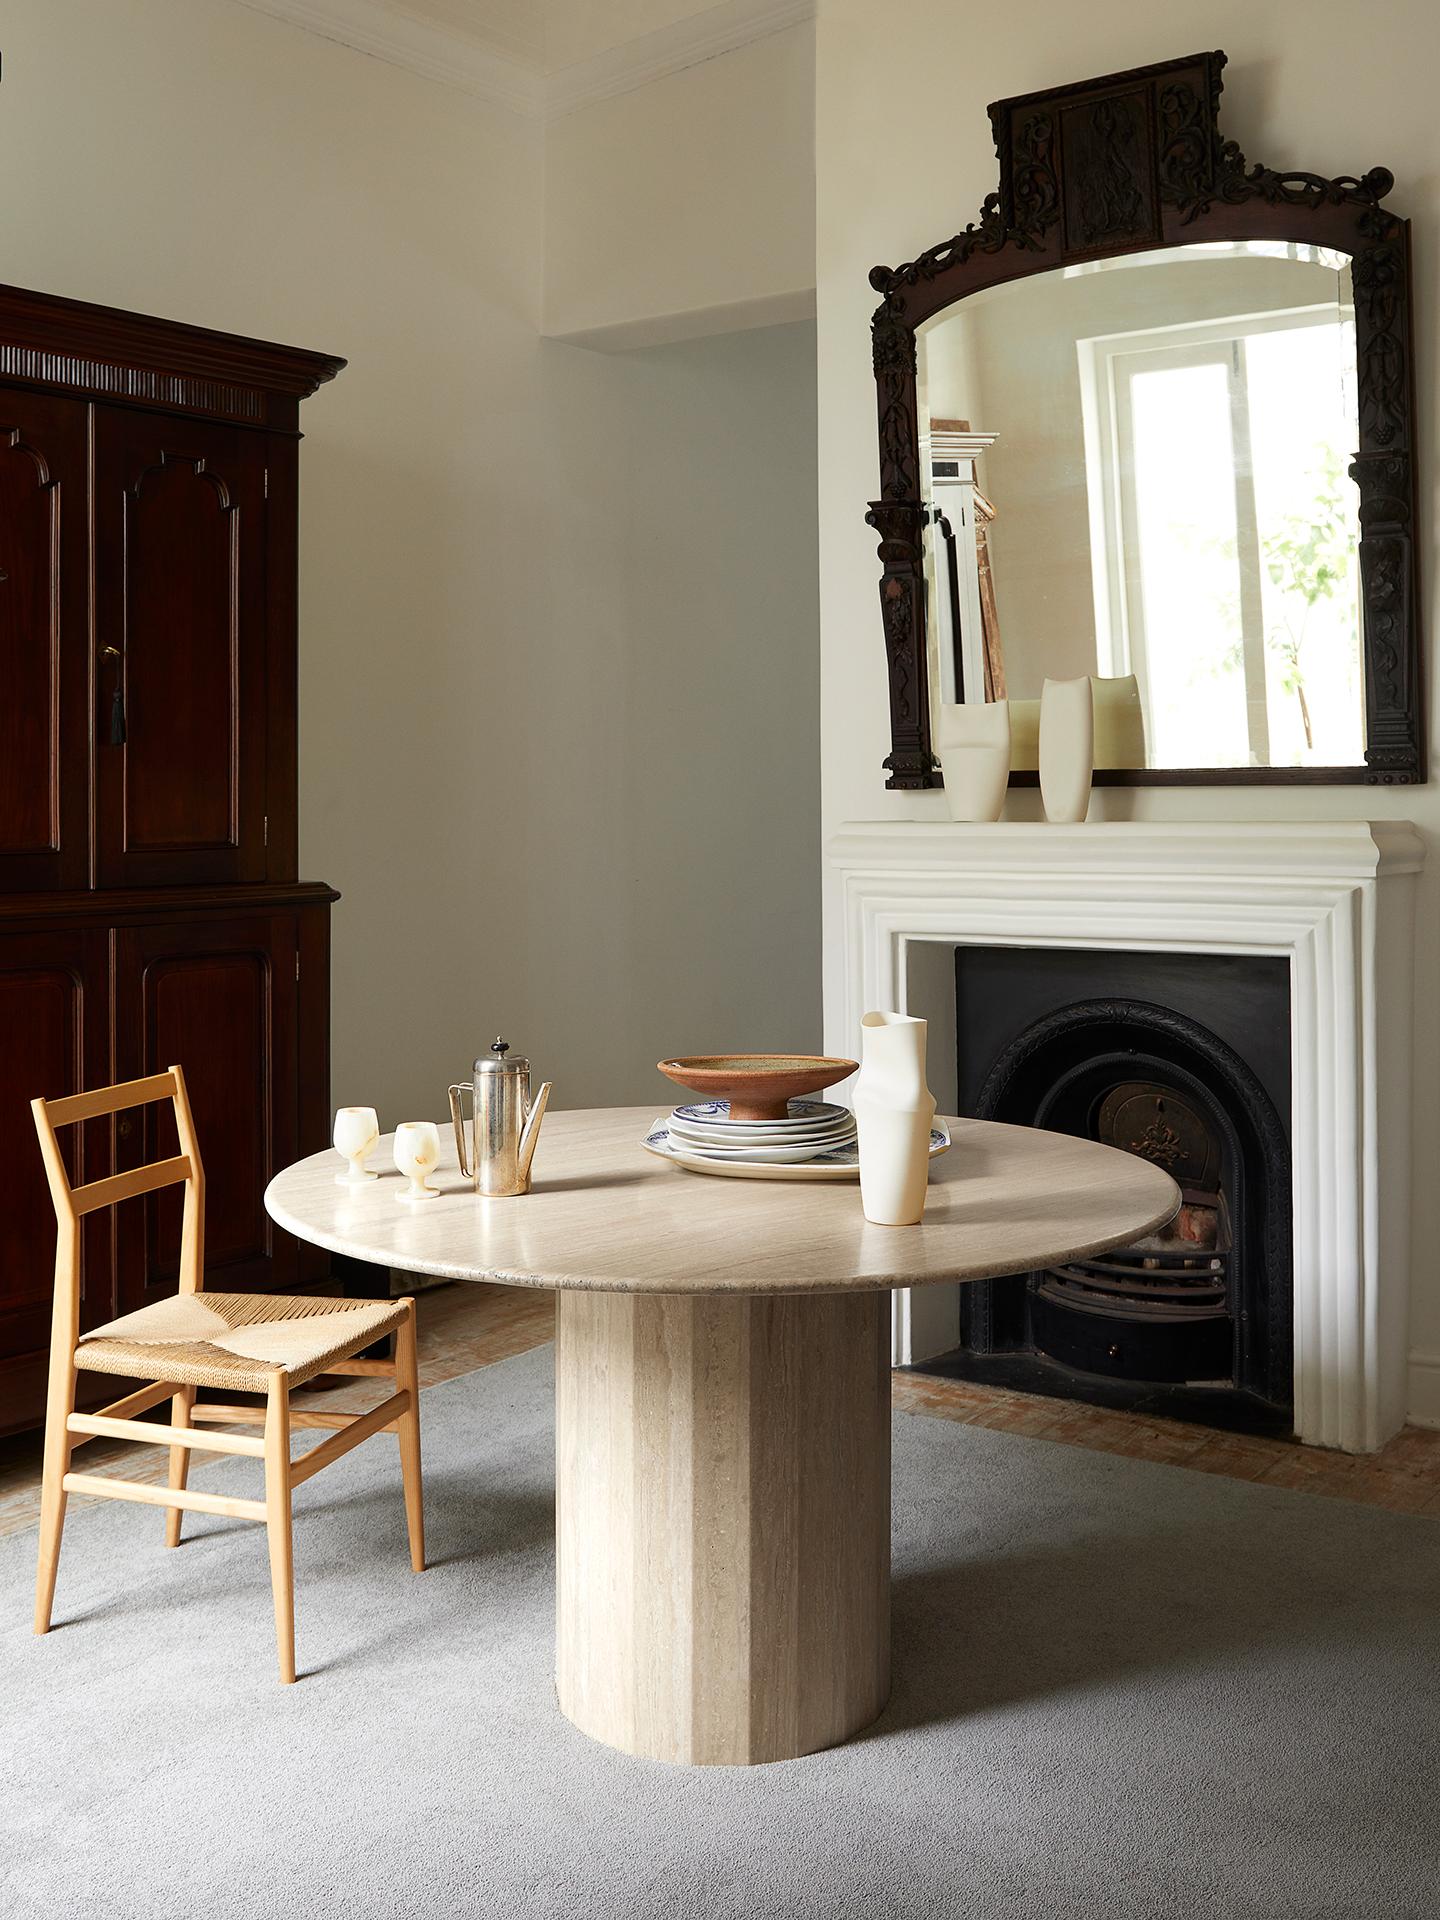 The Ashby Travertine round dining table is evidence of Lemon’s journey into increasing simplicity. With a design cued entirely by honed and filled Travertine, its round slim top is countered by a strong faceted base – an intentional and definitive